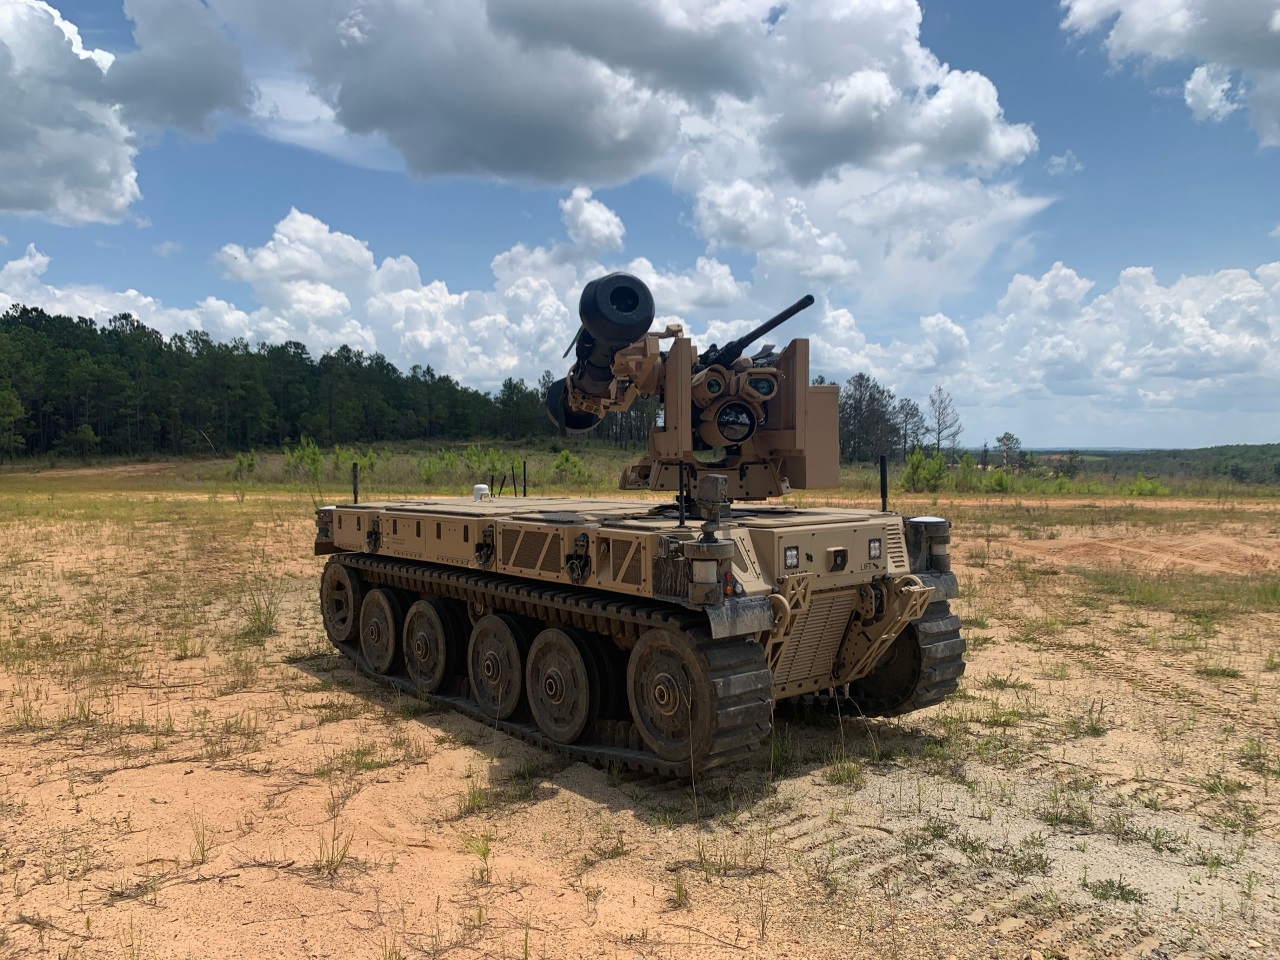 Javelin demonstration from a Robotic Combat Vehicle (RCV) prototype at Redstone Arsenal in Huntsville, AL (Photo by U.S. Army)